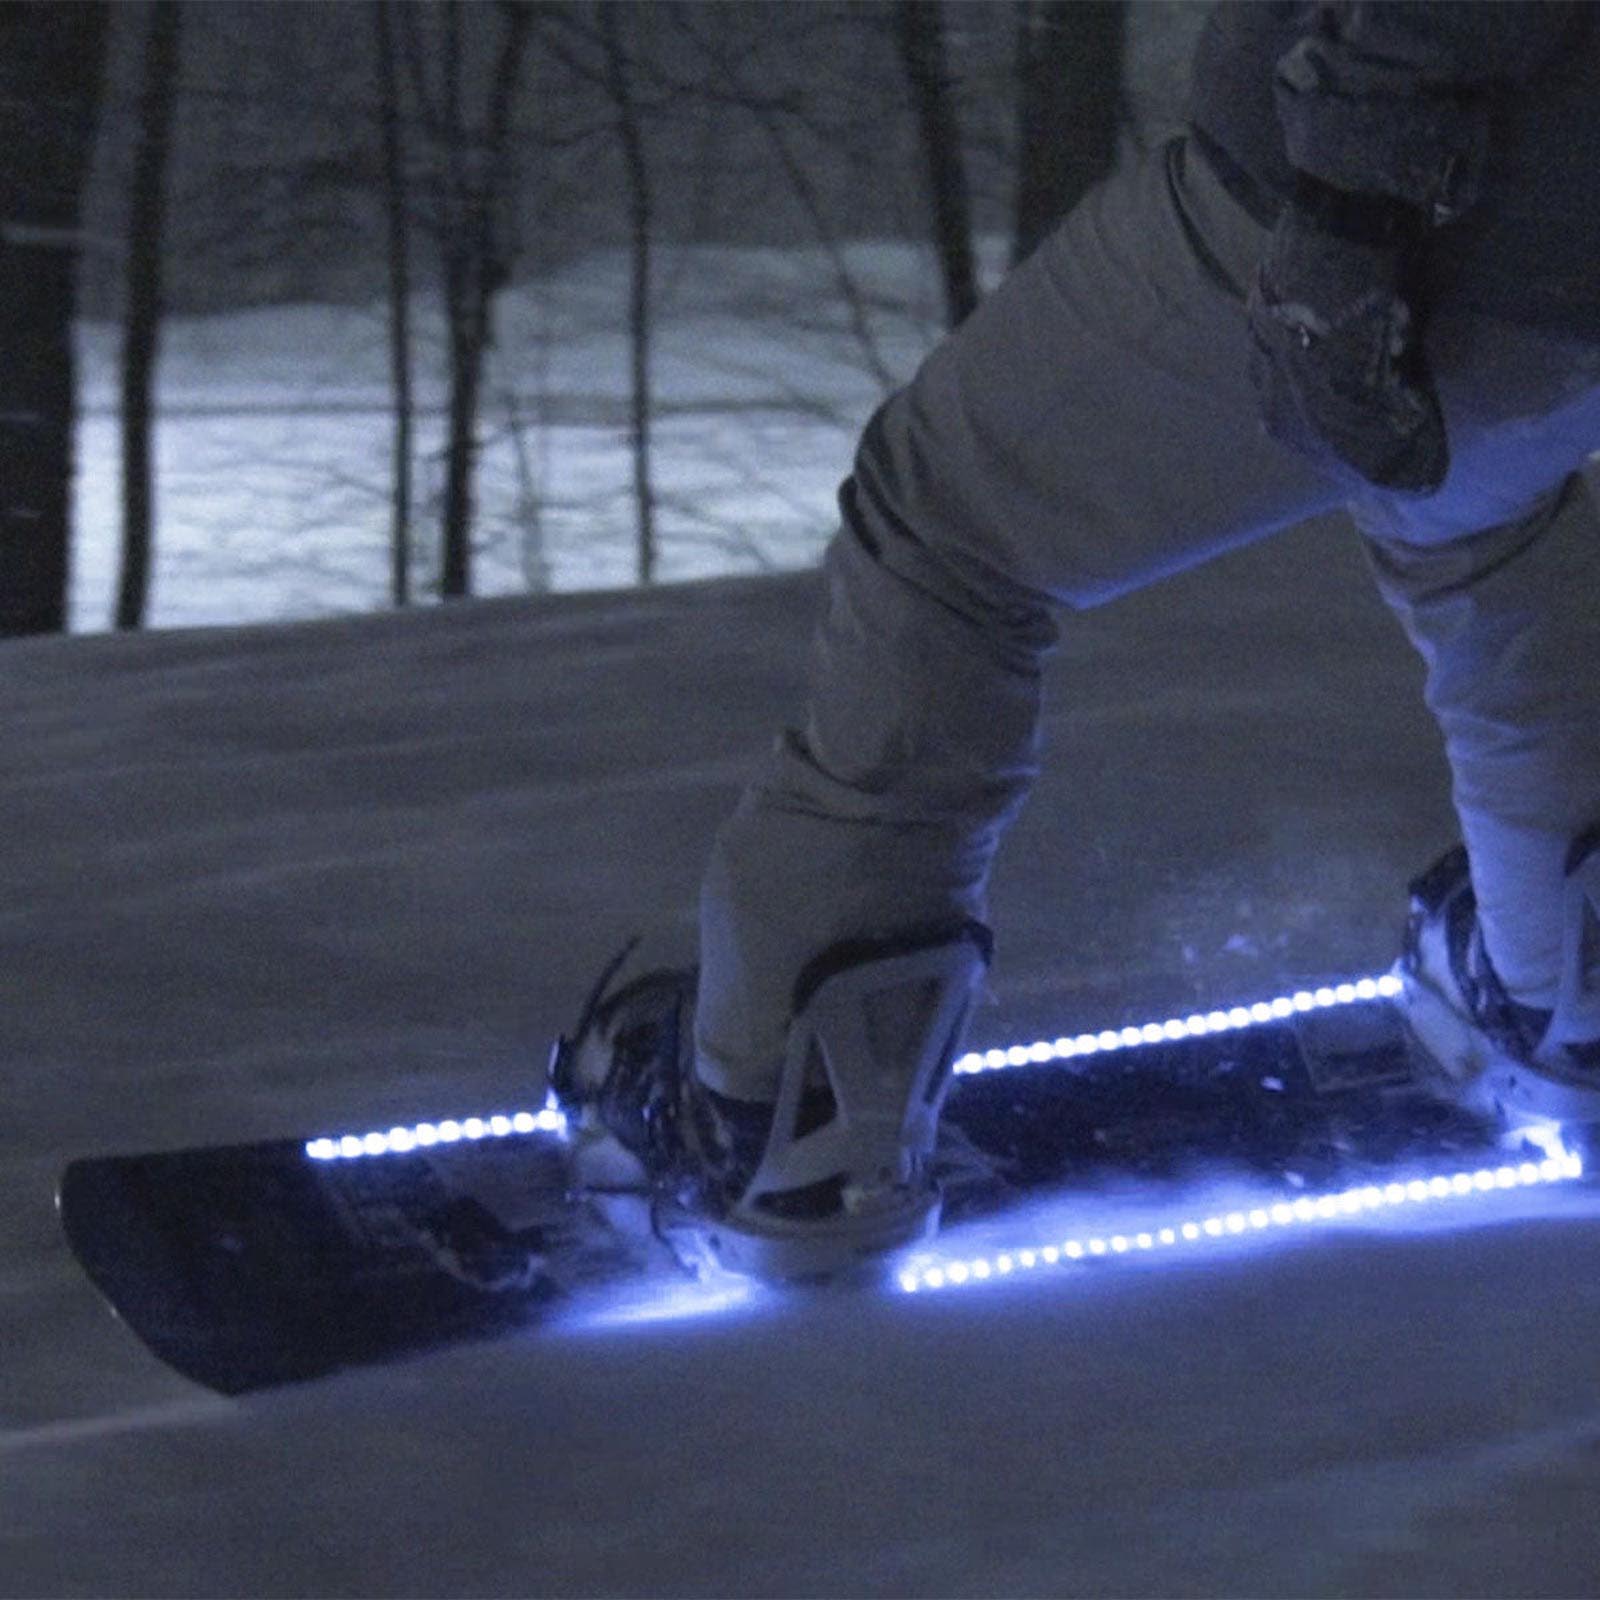 Actionglow Lights For Sports Equipment Shark Tank Snowboard